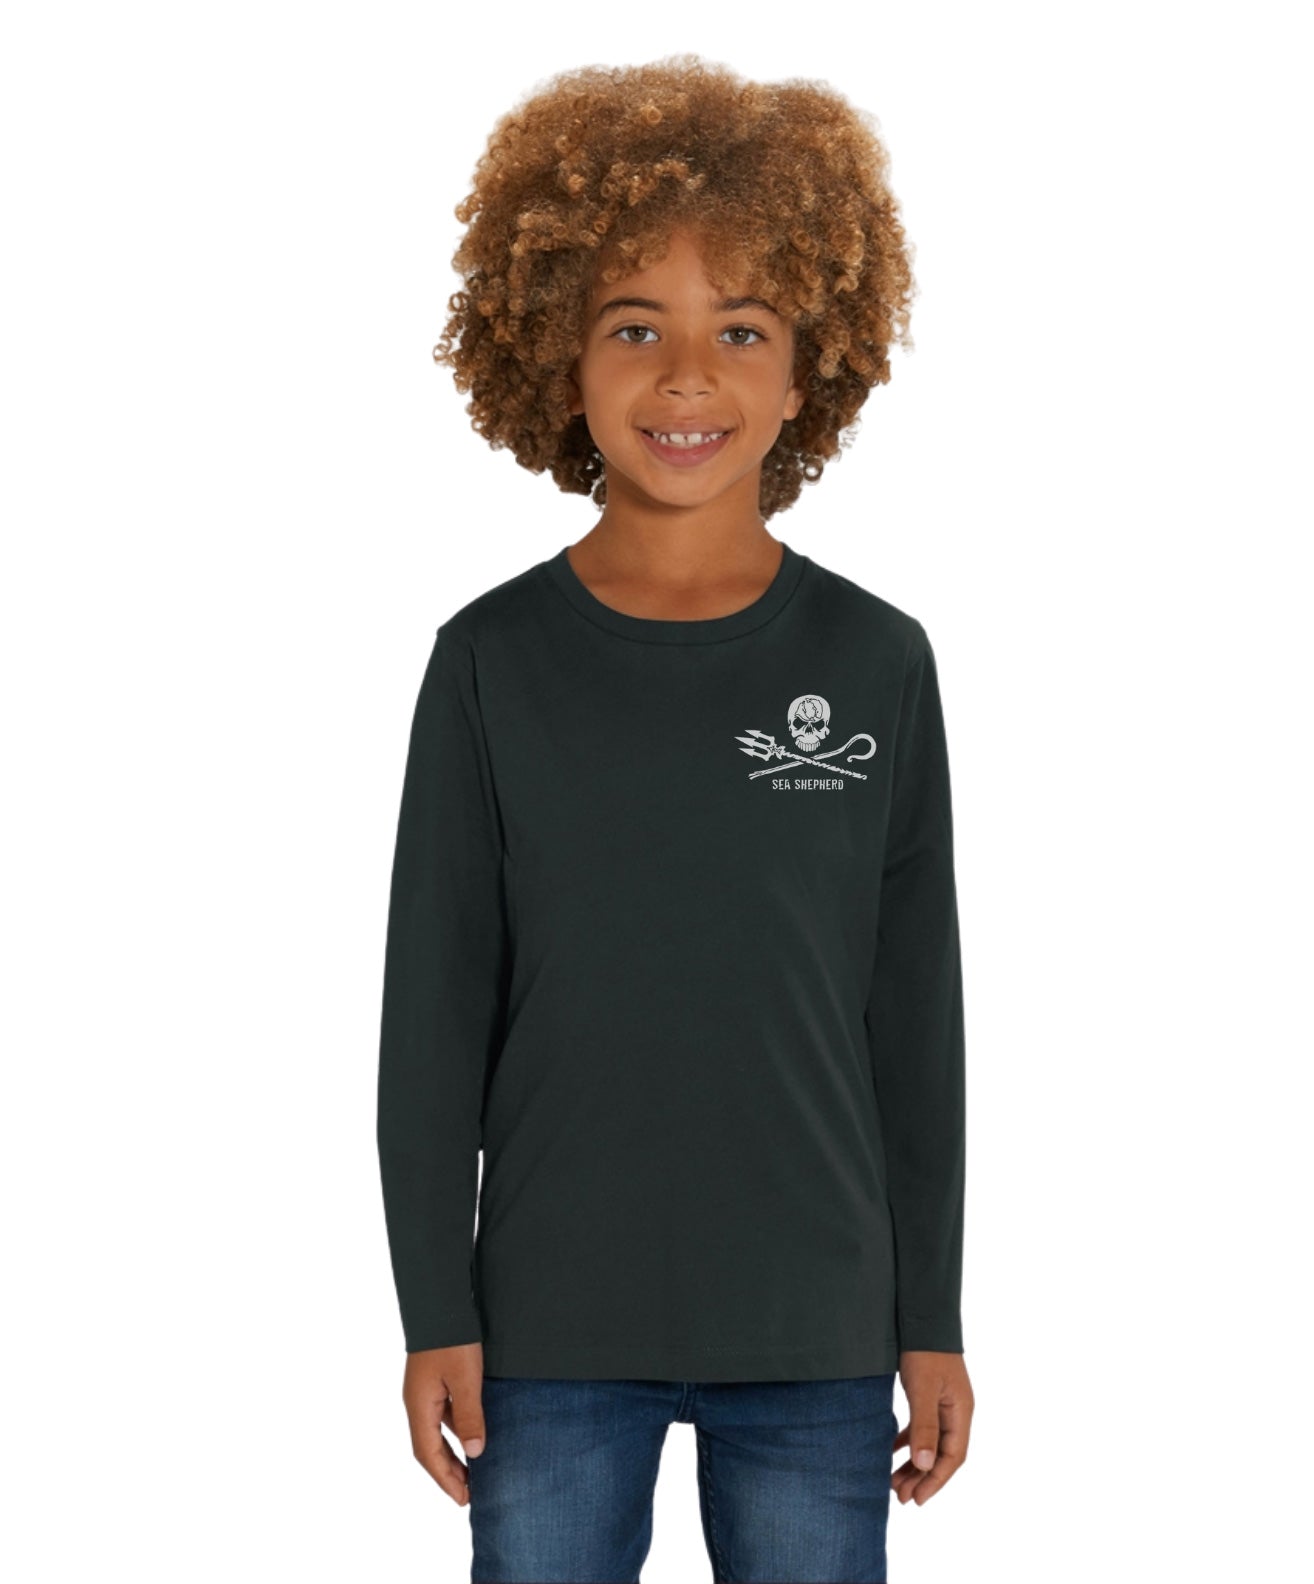 T-shirt Kids Jolly Roger Manches longues